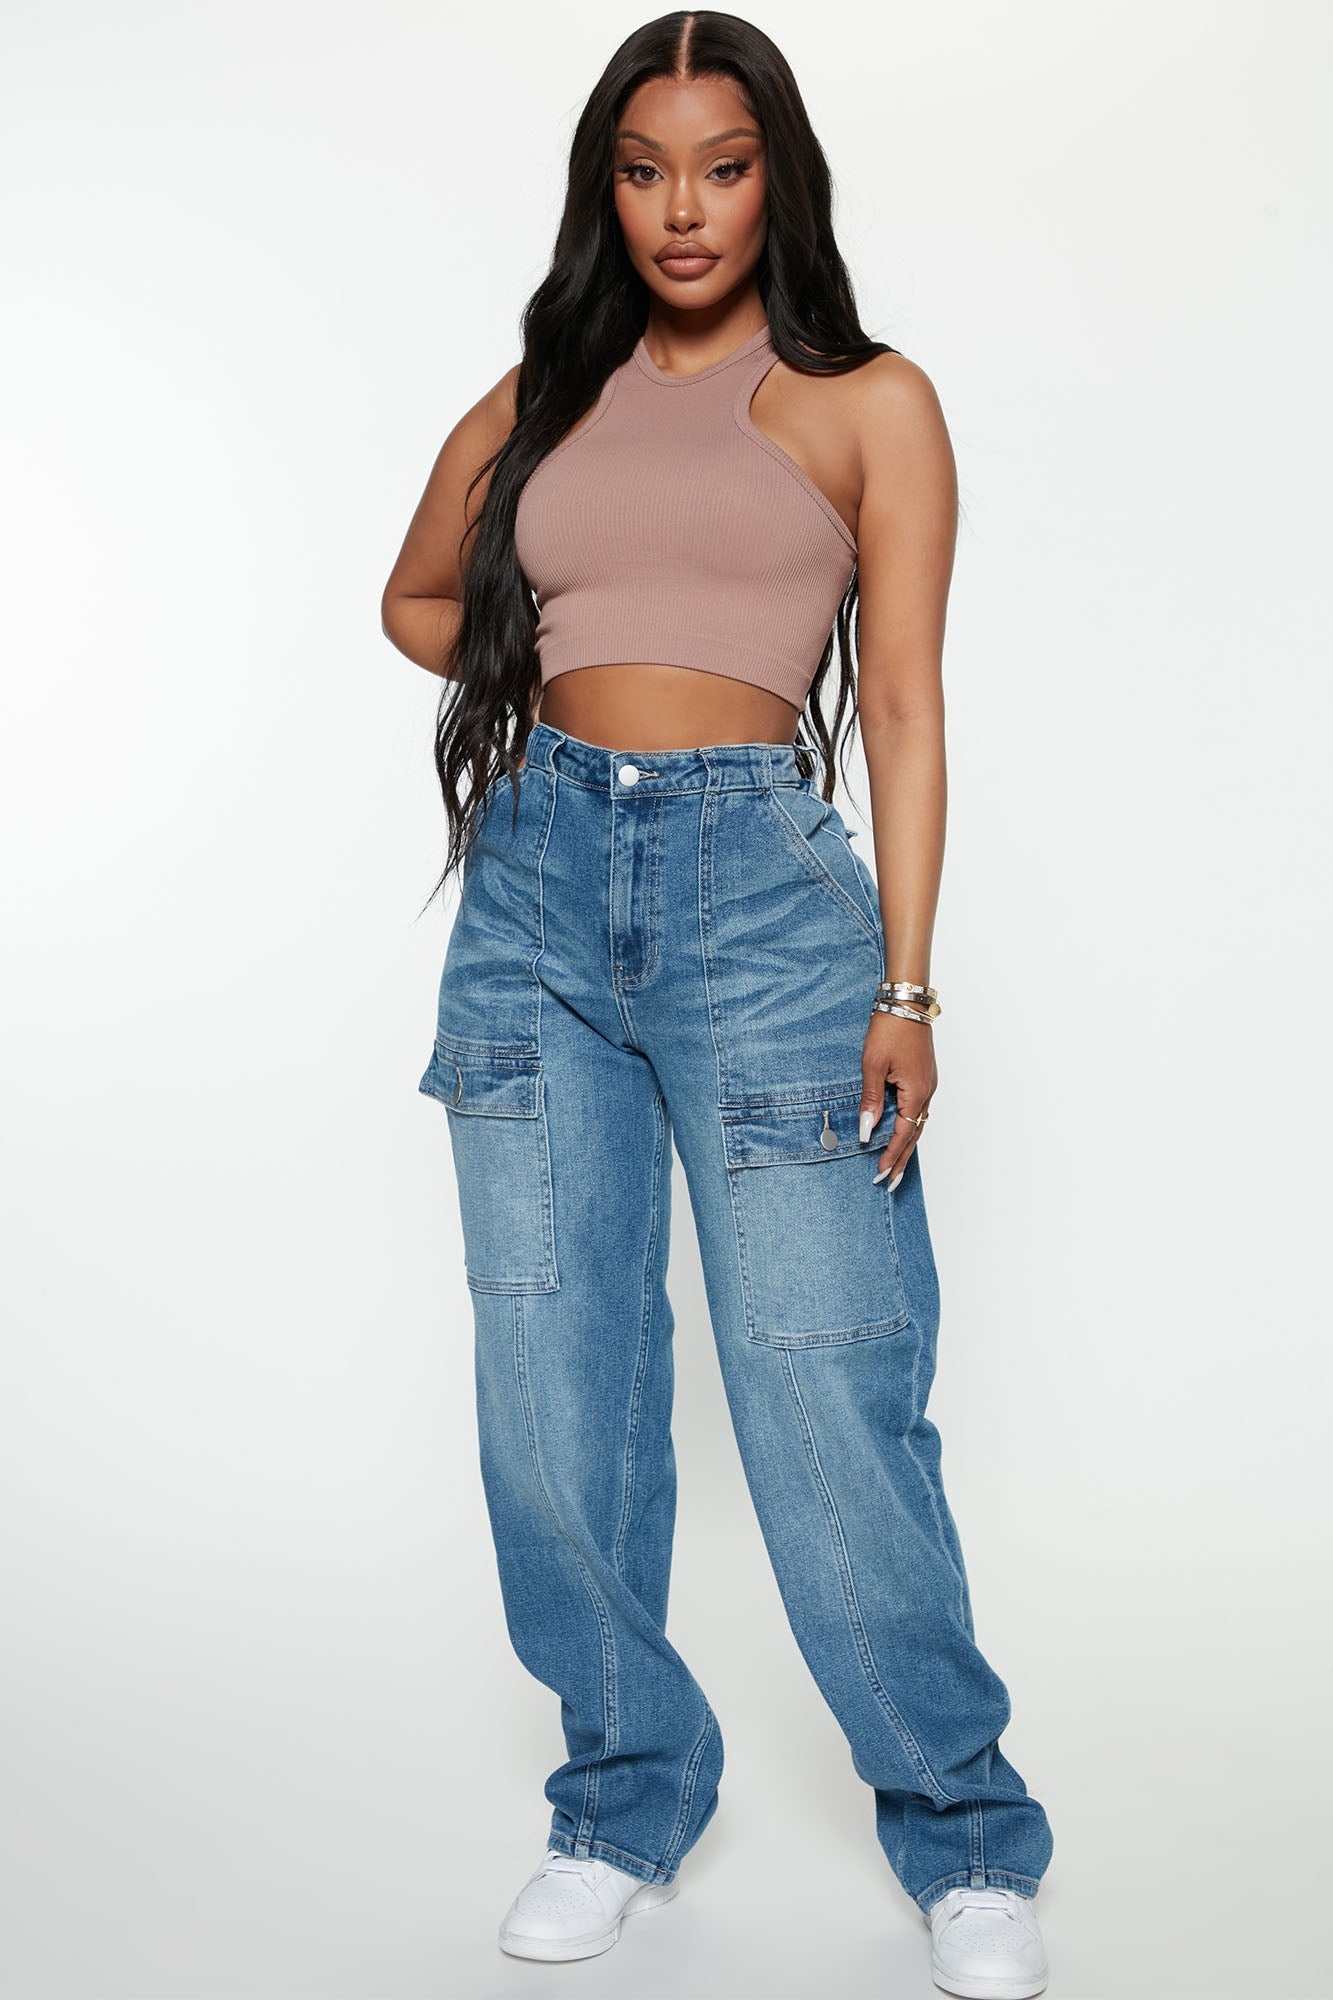 Up In Arms 90's Loose Cargo Jeans - Medium Wash, Fashion Nova, Jeans